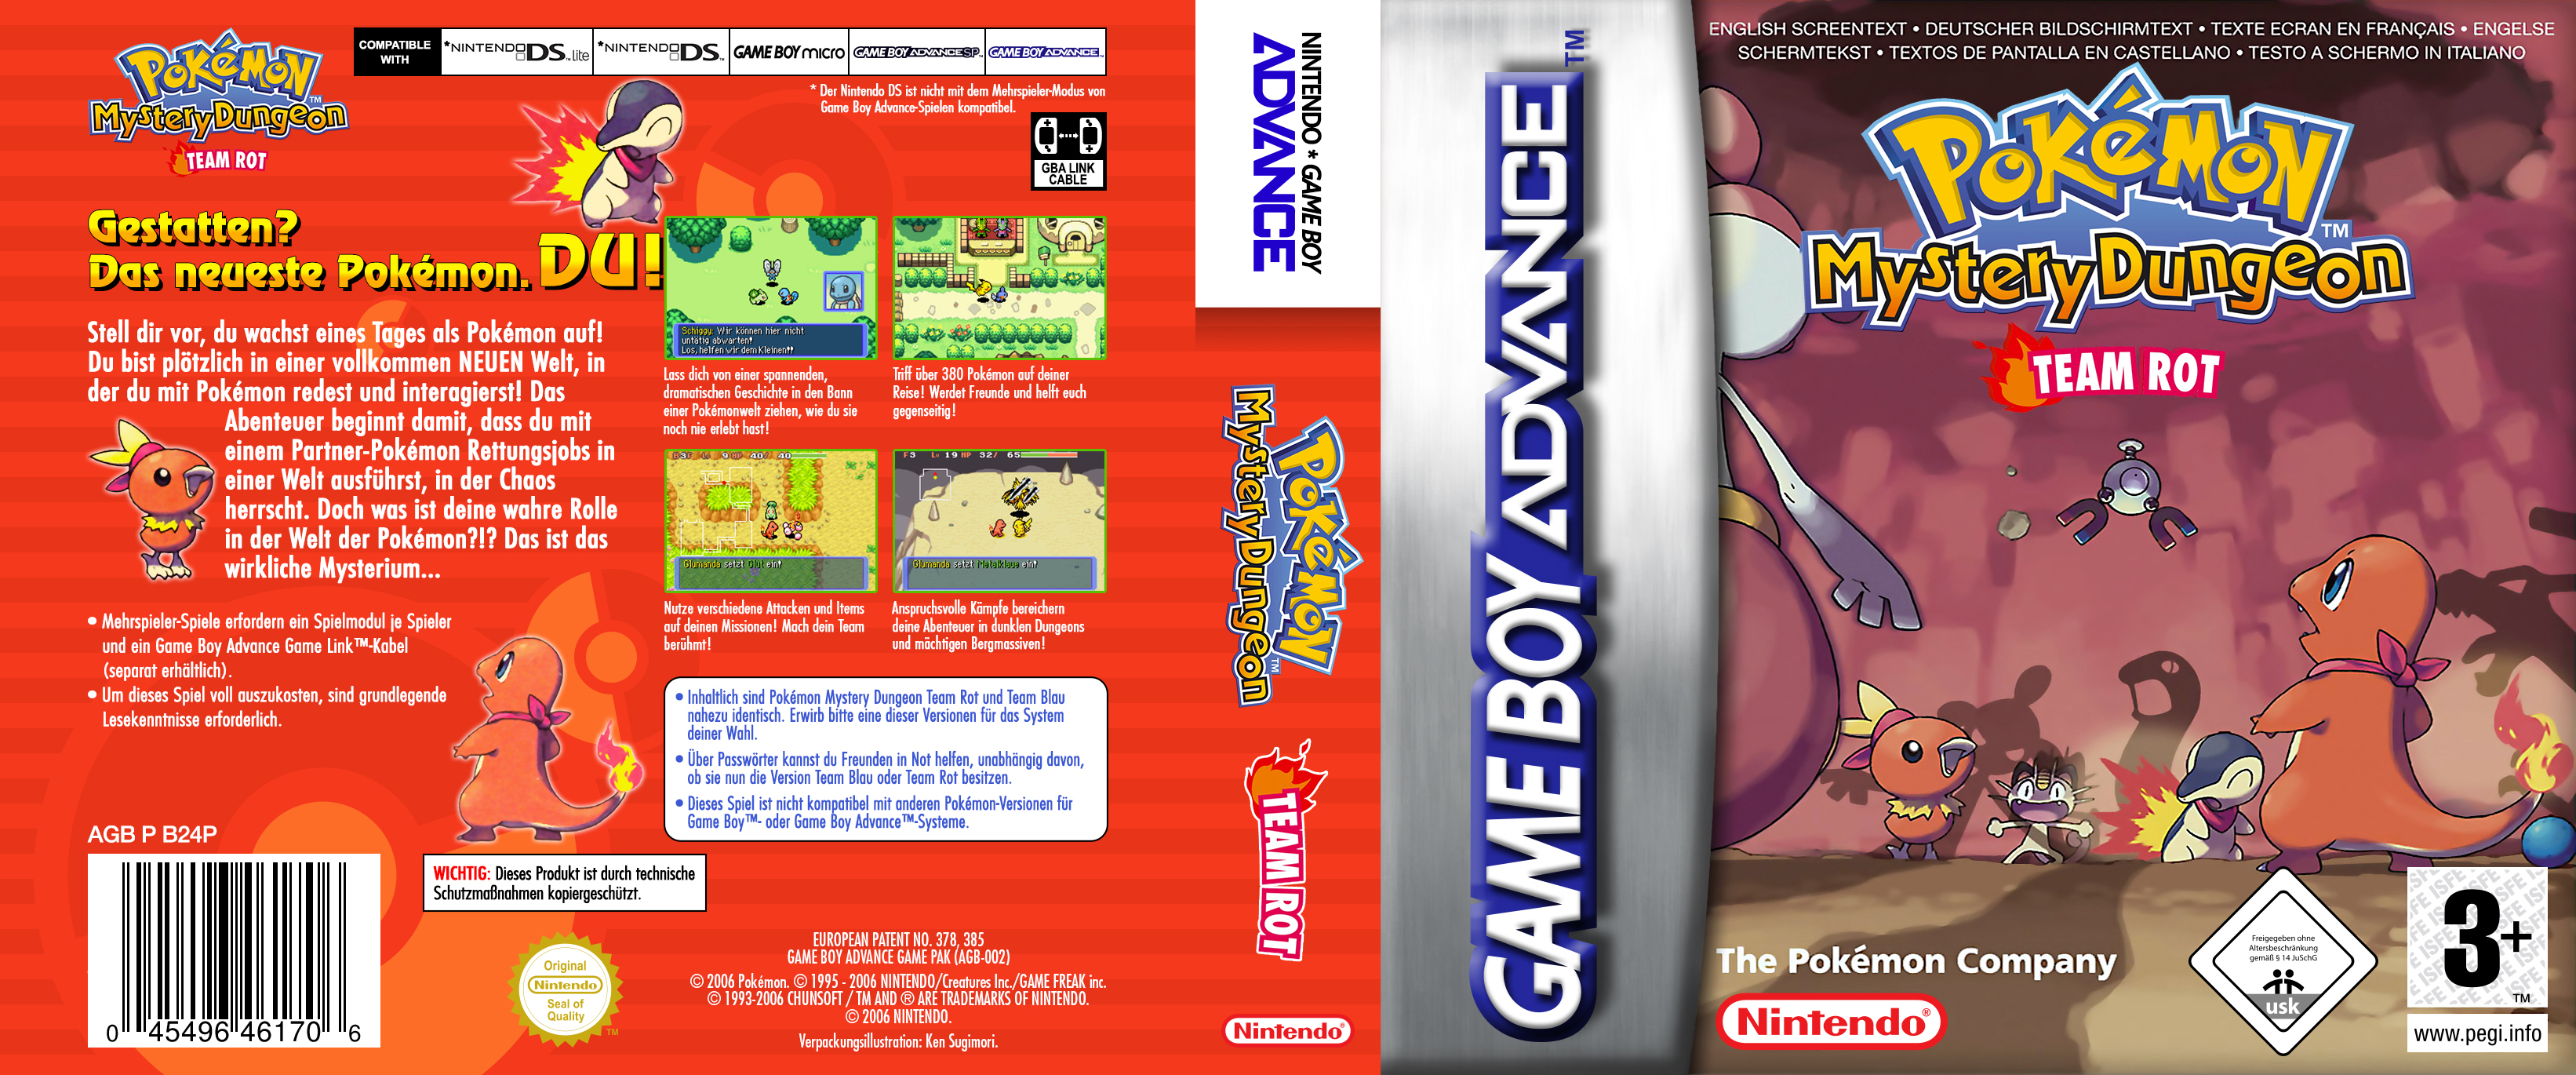 Pokemon Mystery Dungeon Gameboy Advance Covers Cover Century Over 500 000 Album Art Covers For Free